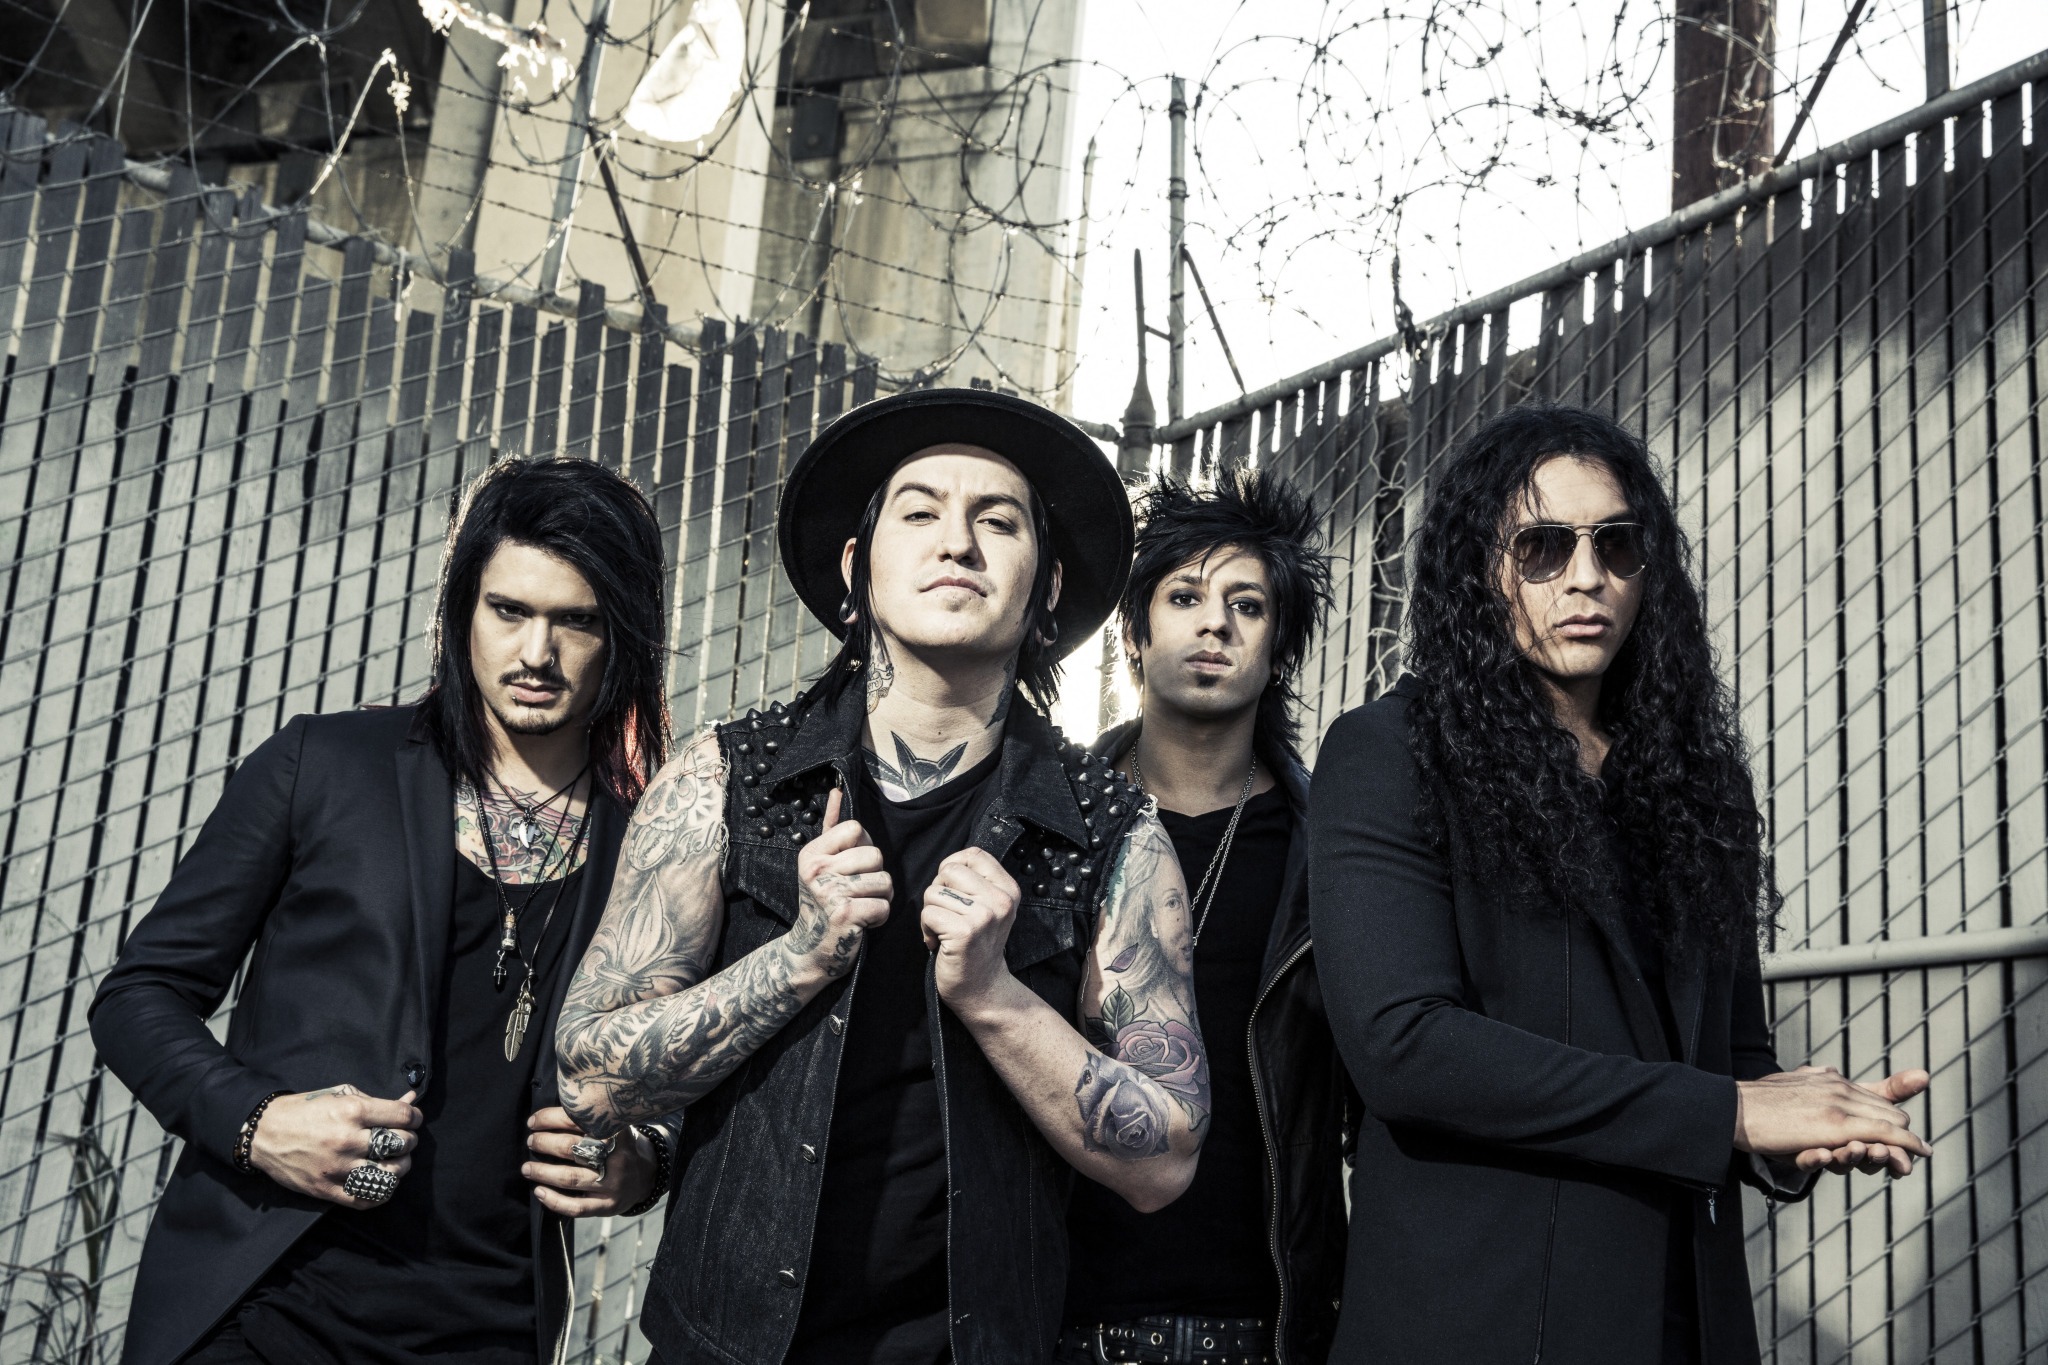 ESCAPE THE FATE RELEASE MUSIC VIDEO FOR SINGLE "REMEMBER EVERY SCAR"